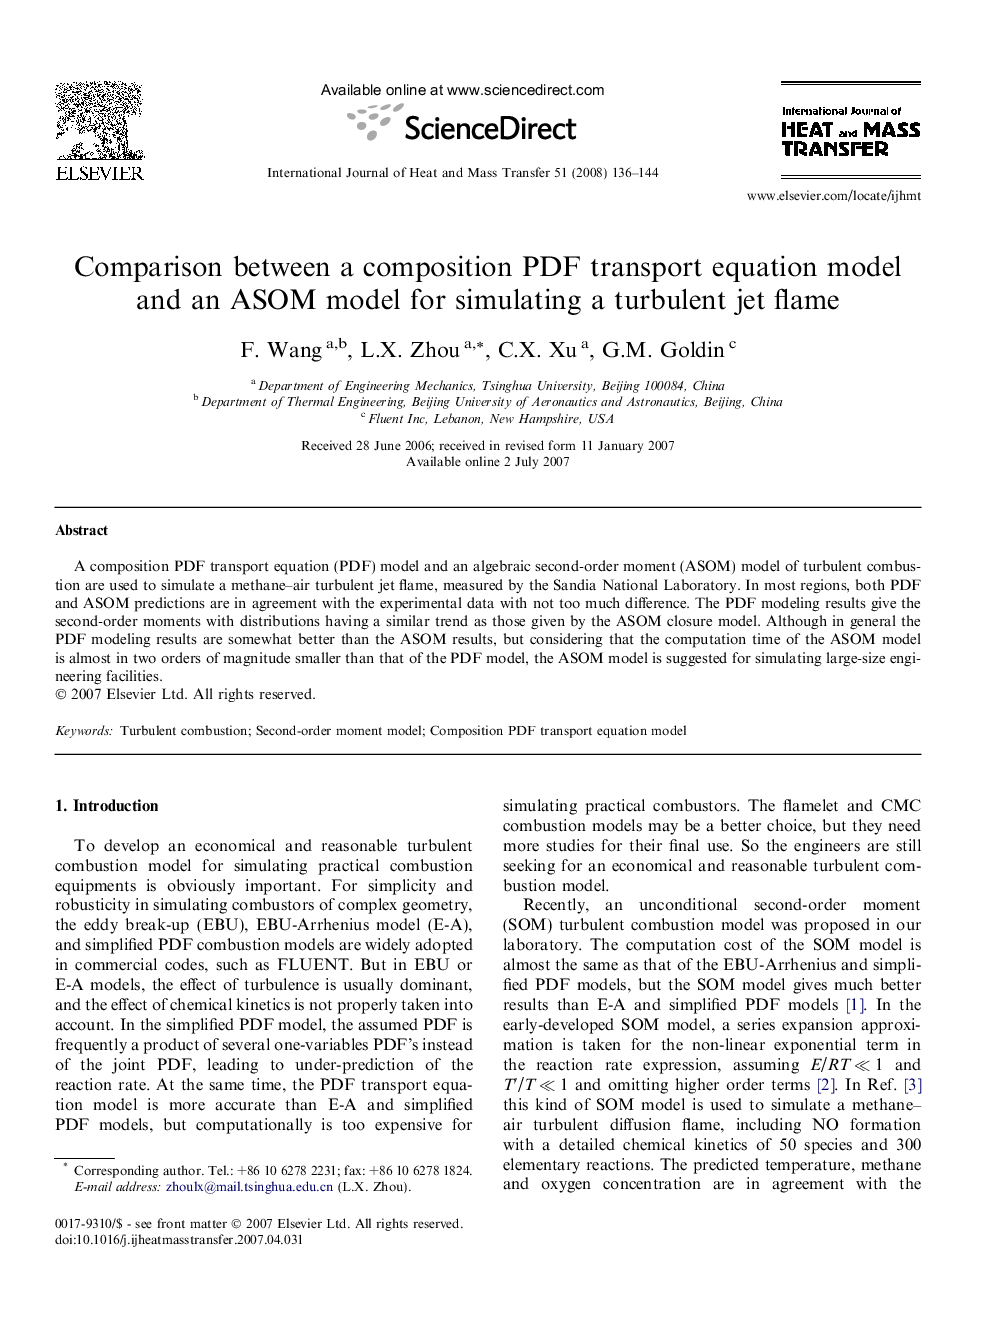 Comparison between a composition PDF transport equation model and an ASOM model for simulating a turbulent jet flame